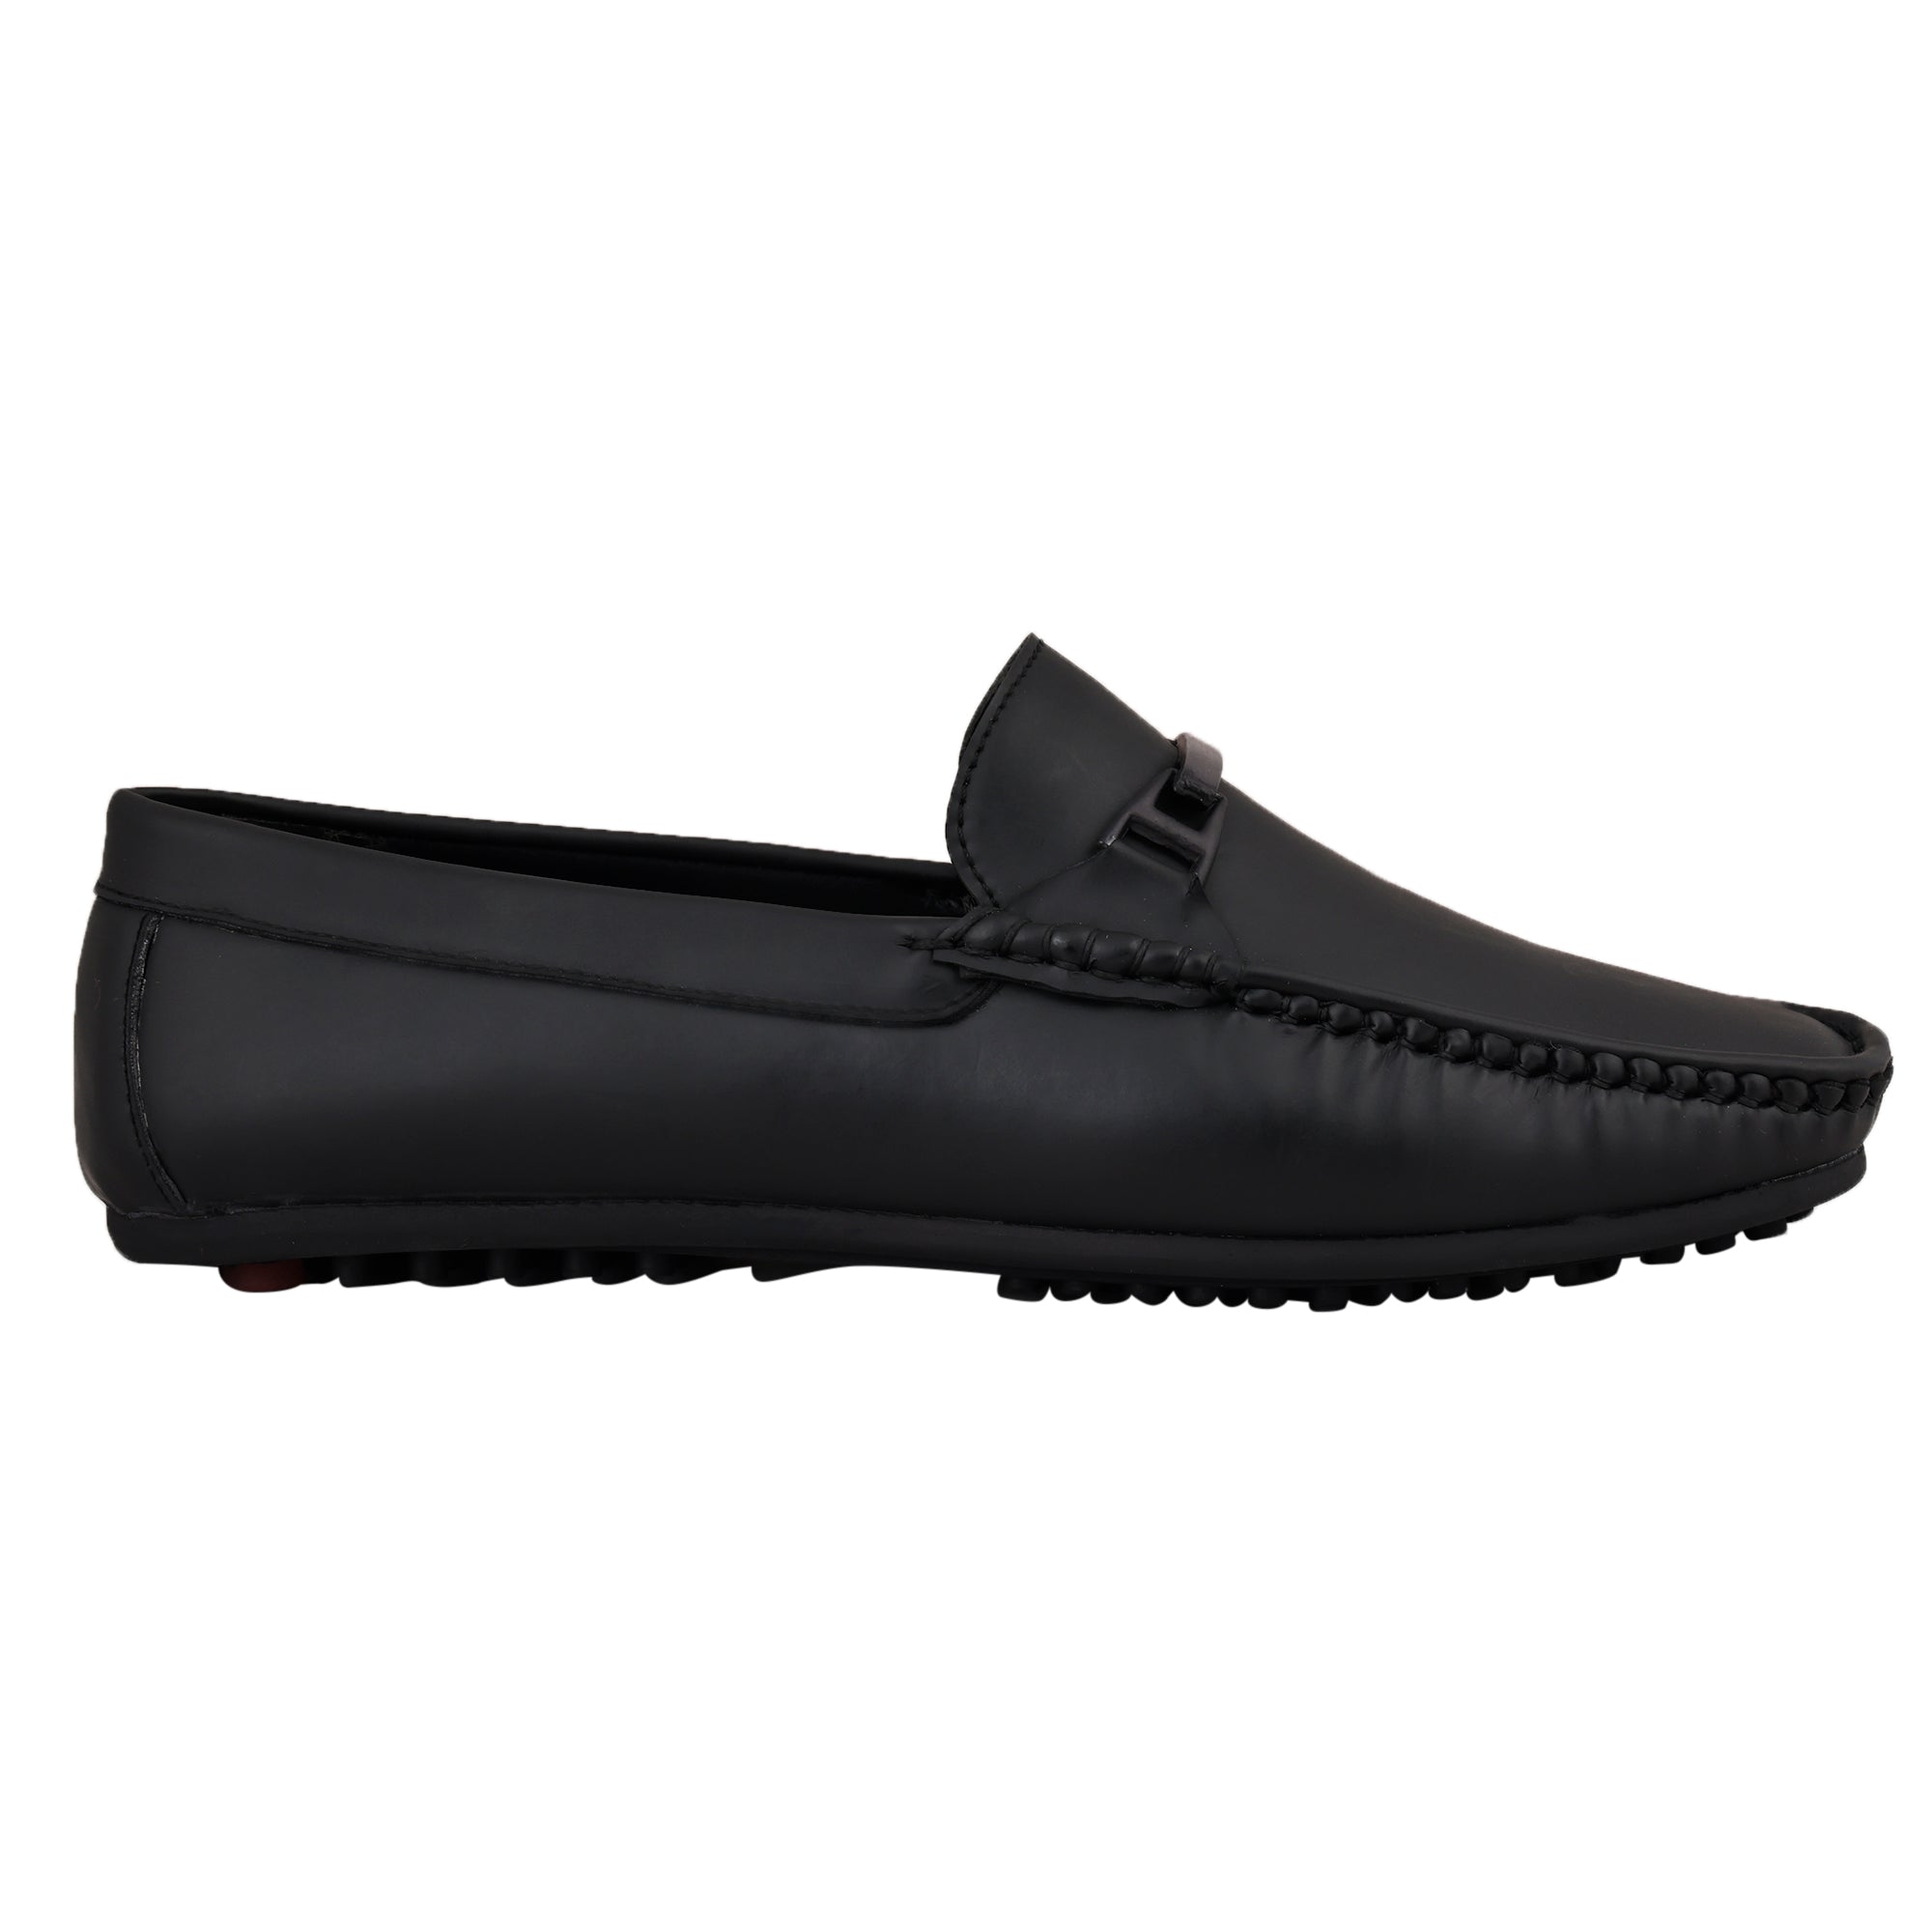 LB 39 Men's Brunette Black Slip On Style Loafer Most Comfortable Doctor Insole With Wrinkle Free Fox Leather Loafers.